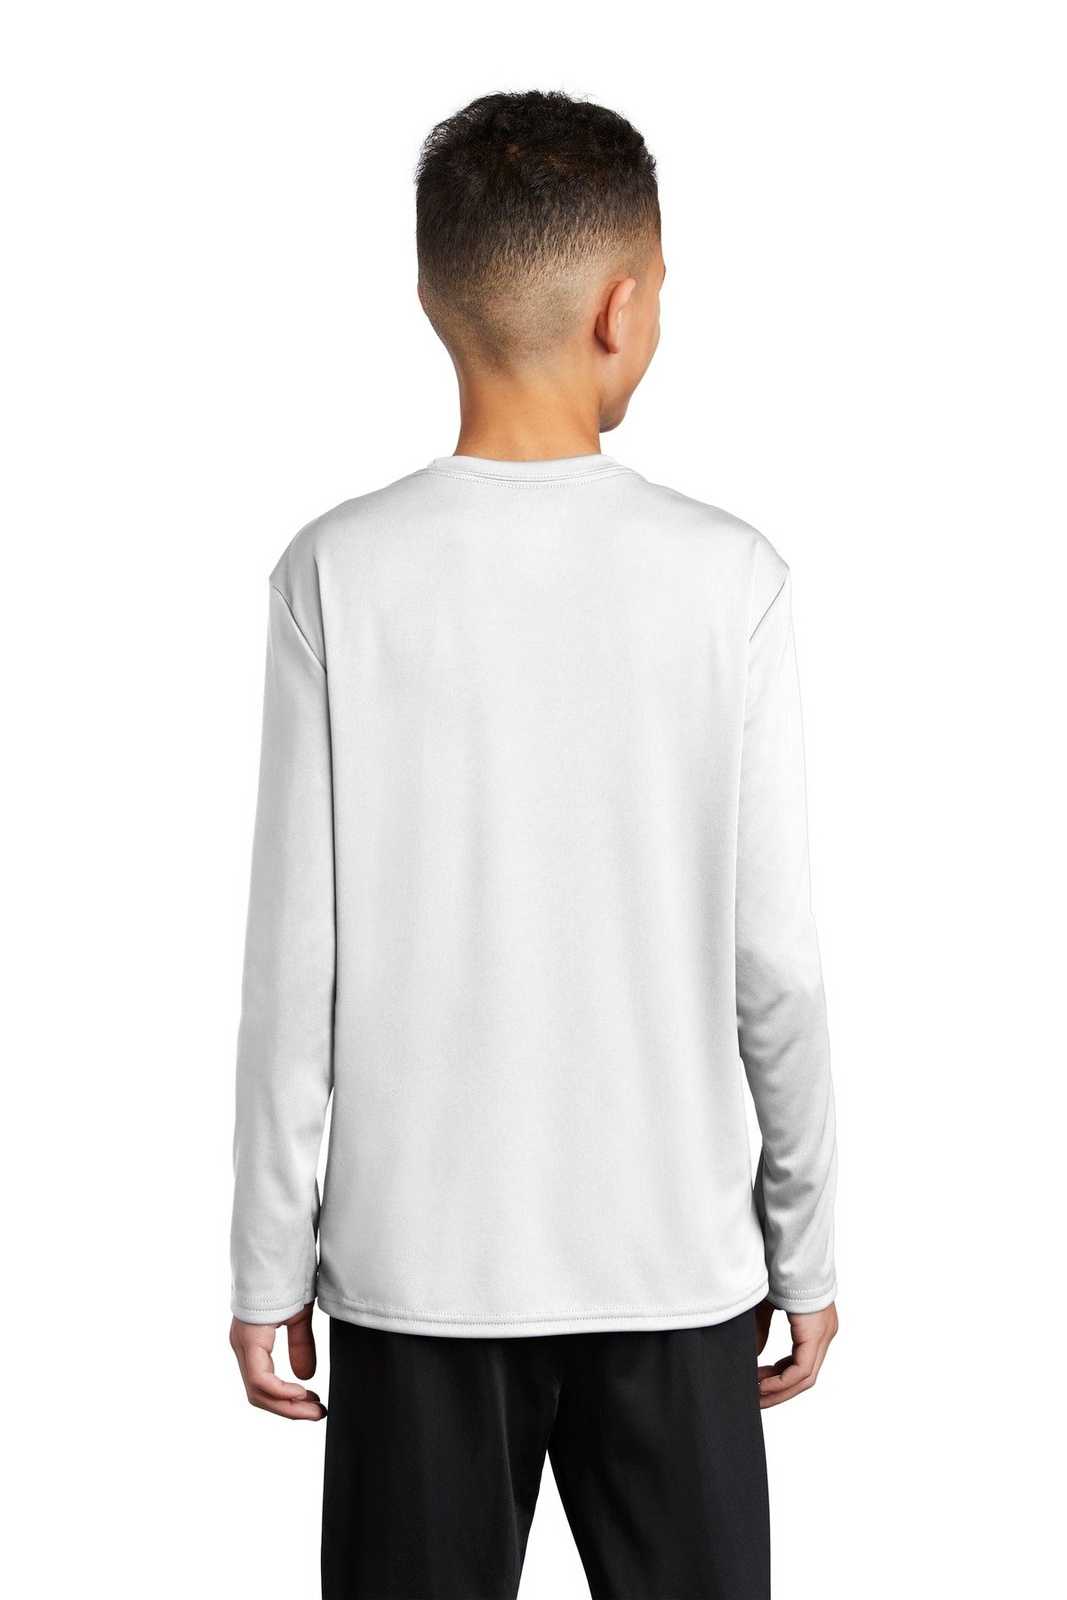 Port &amp; Company PC380YLS Youth Long Sleeve Performance Tee - White - HIT a Double - 2